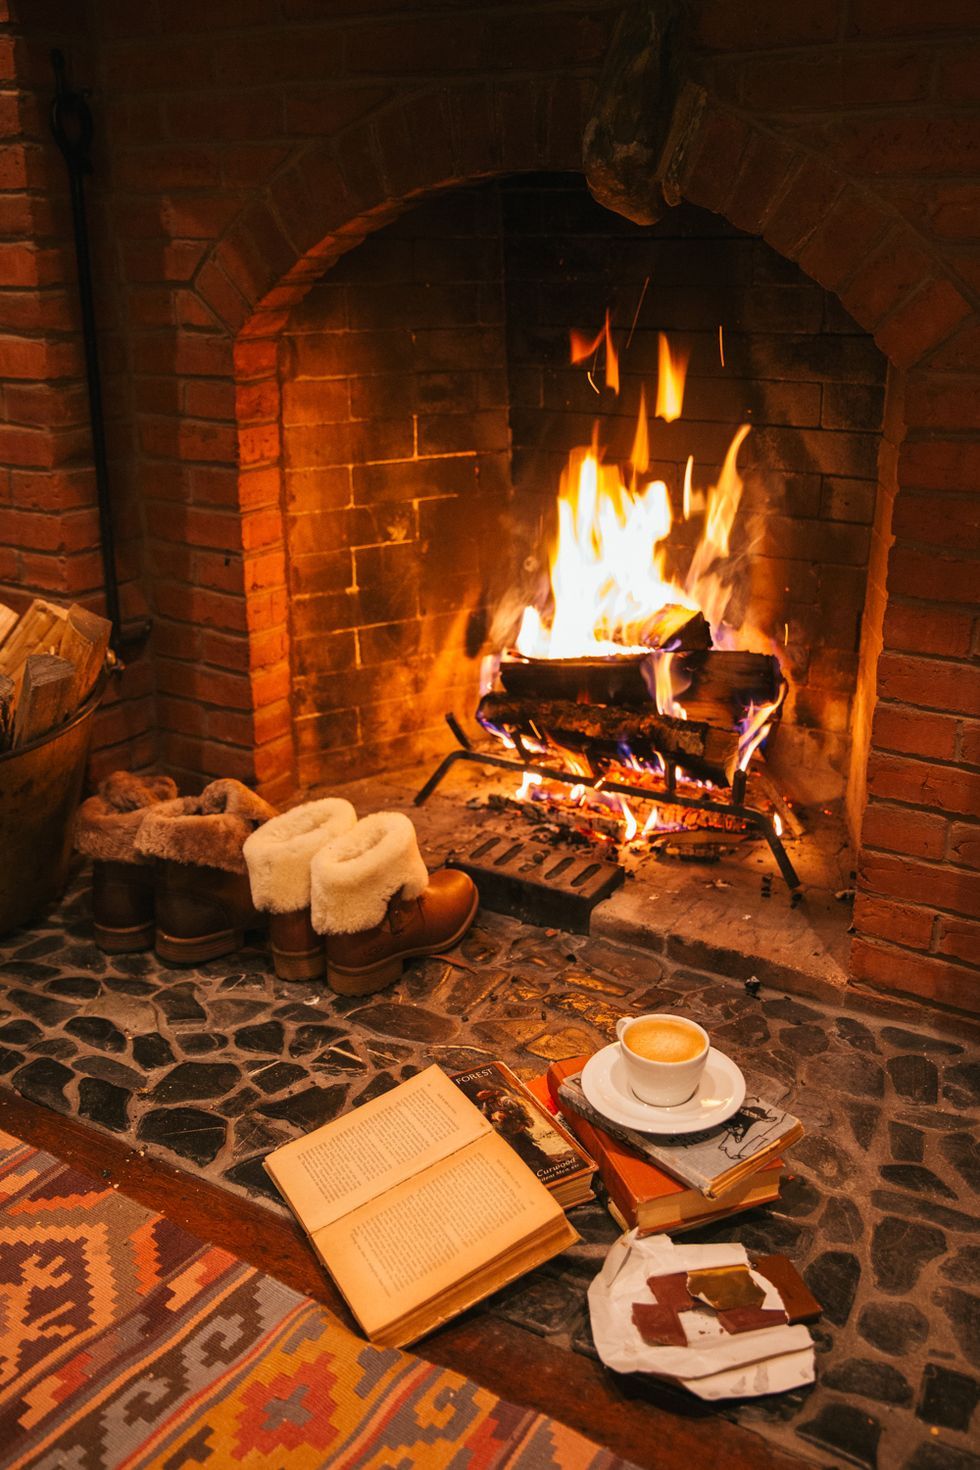 Cozy Photo of Fireplaces That Will Make You Want To Stay Inside All Winter. Winter fireplace, Cozy fireplace, Autumn cozy